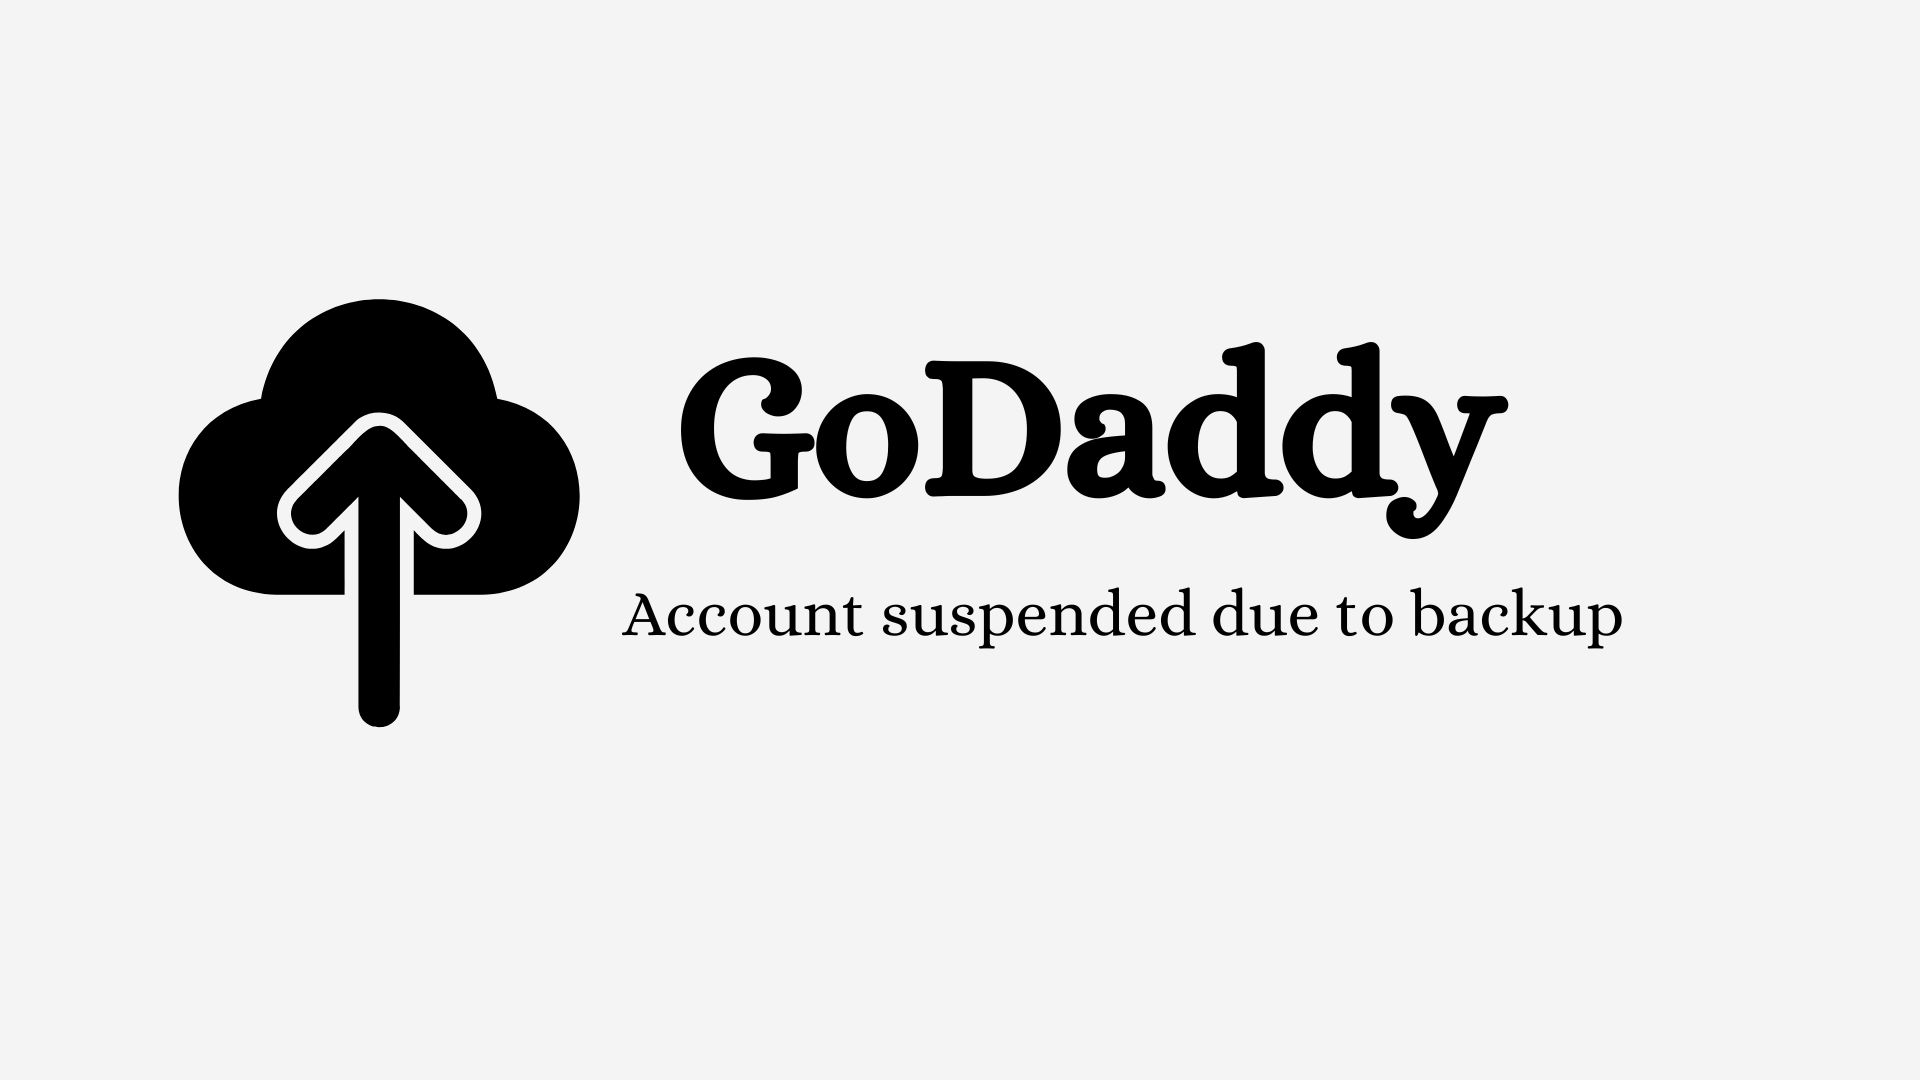 Godaddy account suspended due to Backup